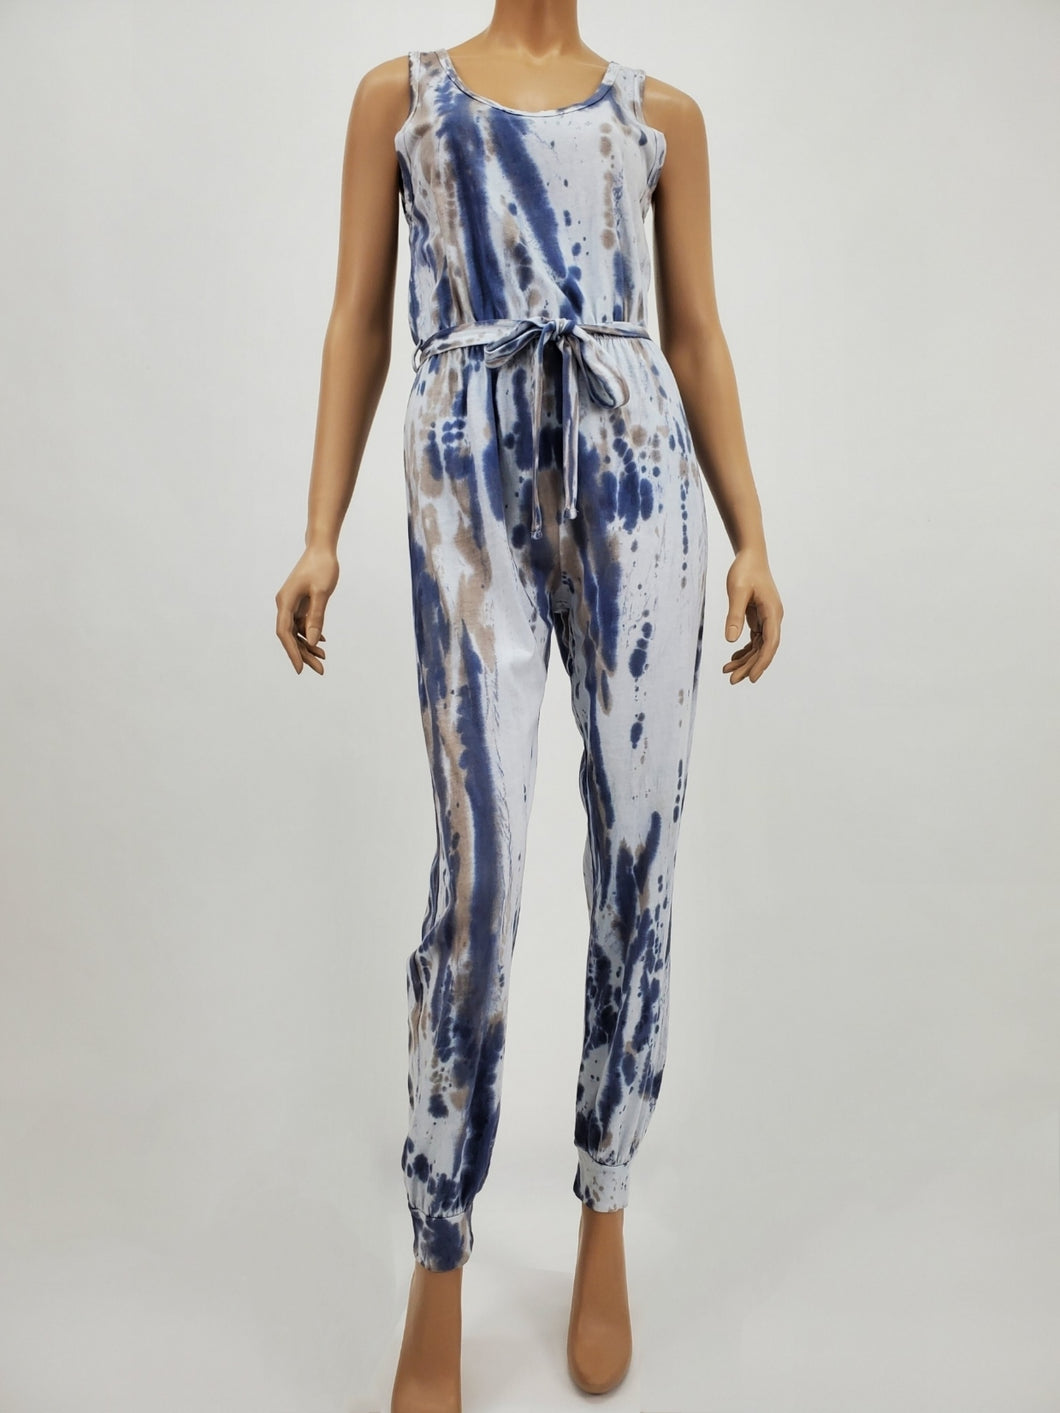 Tie-Dye Jogger Jumpsuit (Blue/Gray/Taupe)